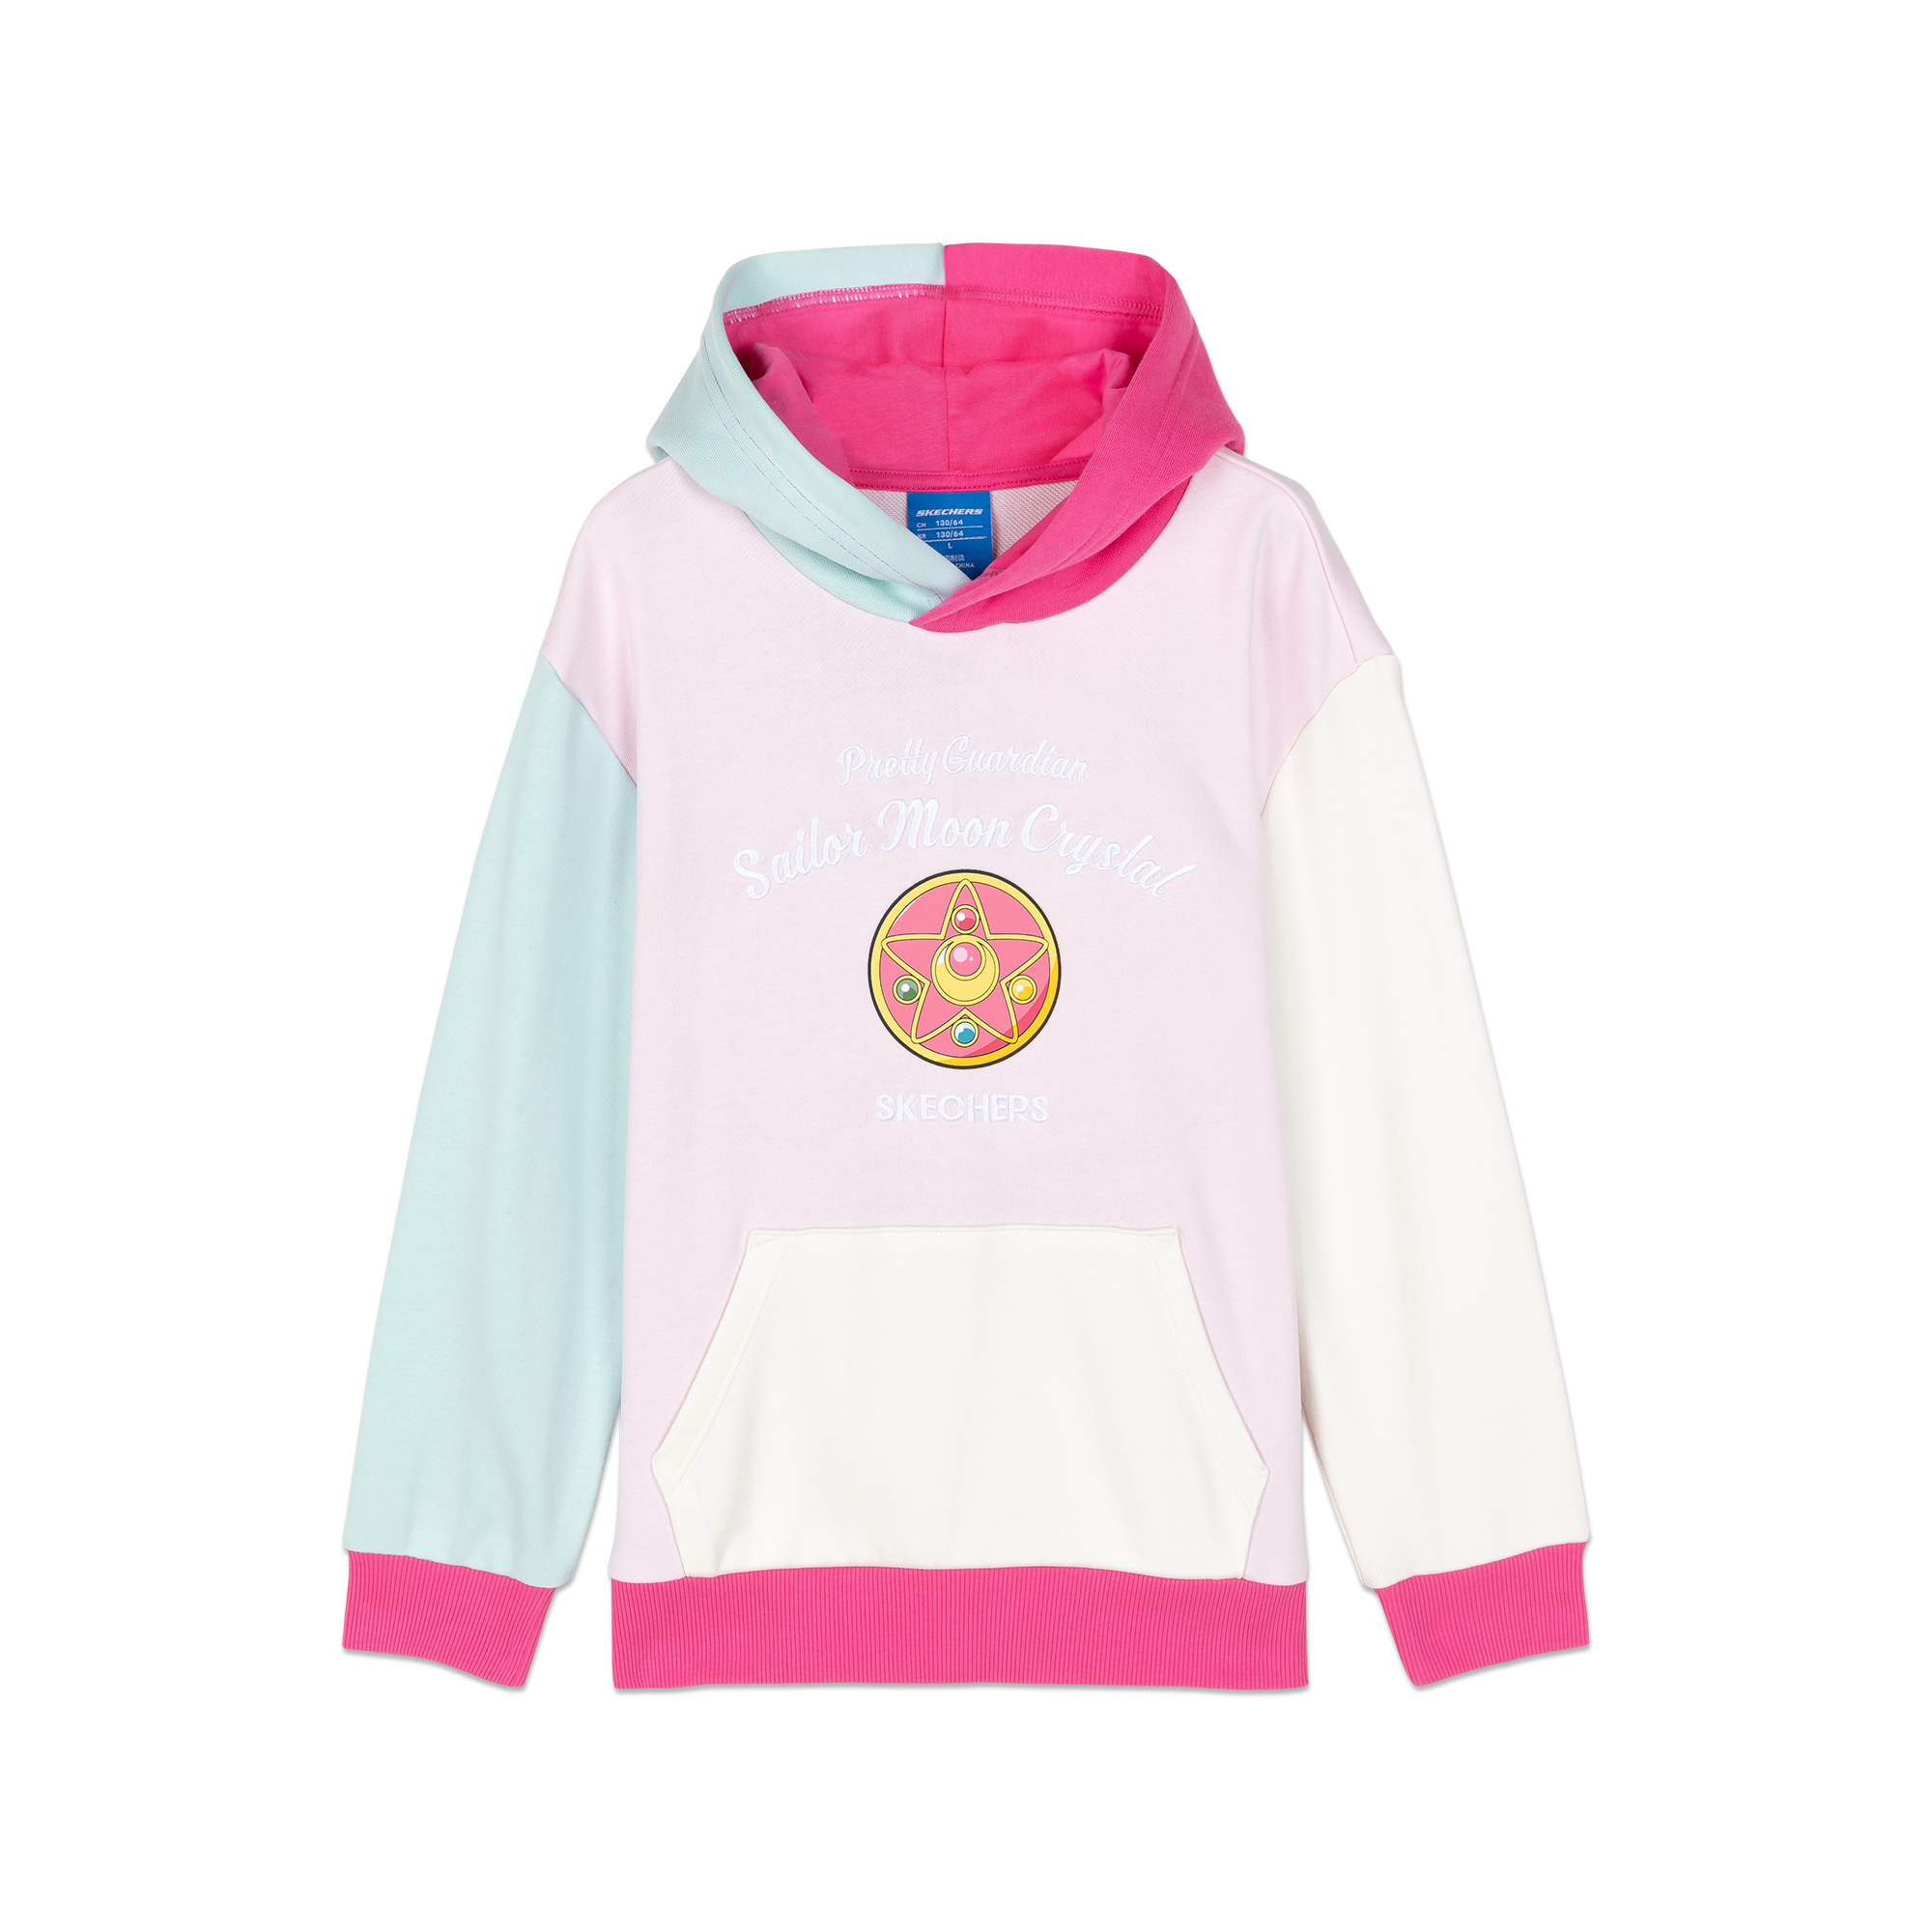 Skechers S'pore launches Sailor Moon-themed T-shirts, pullover dresses ...